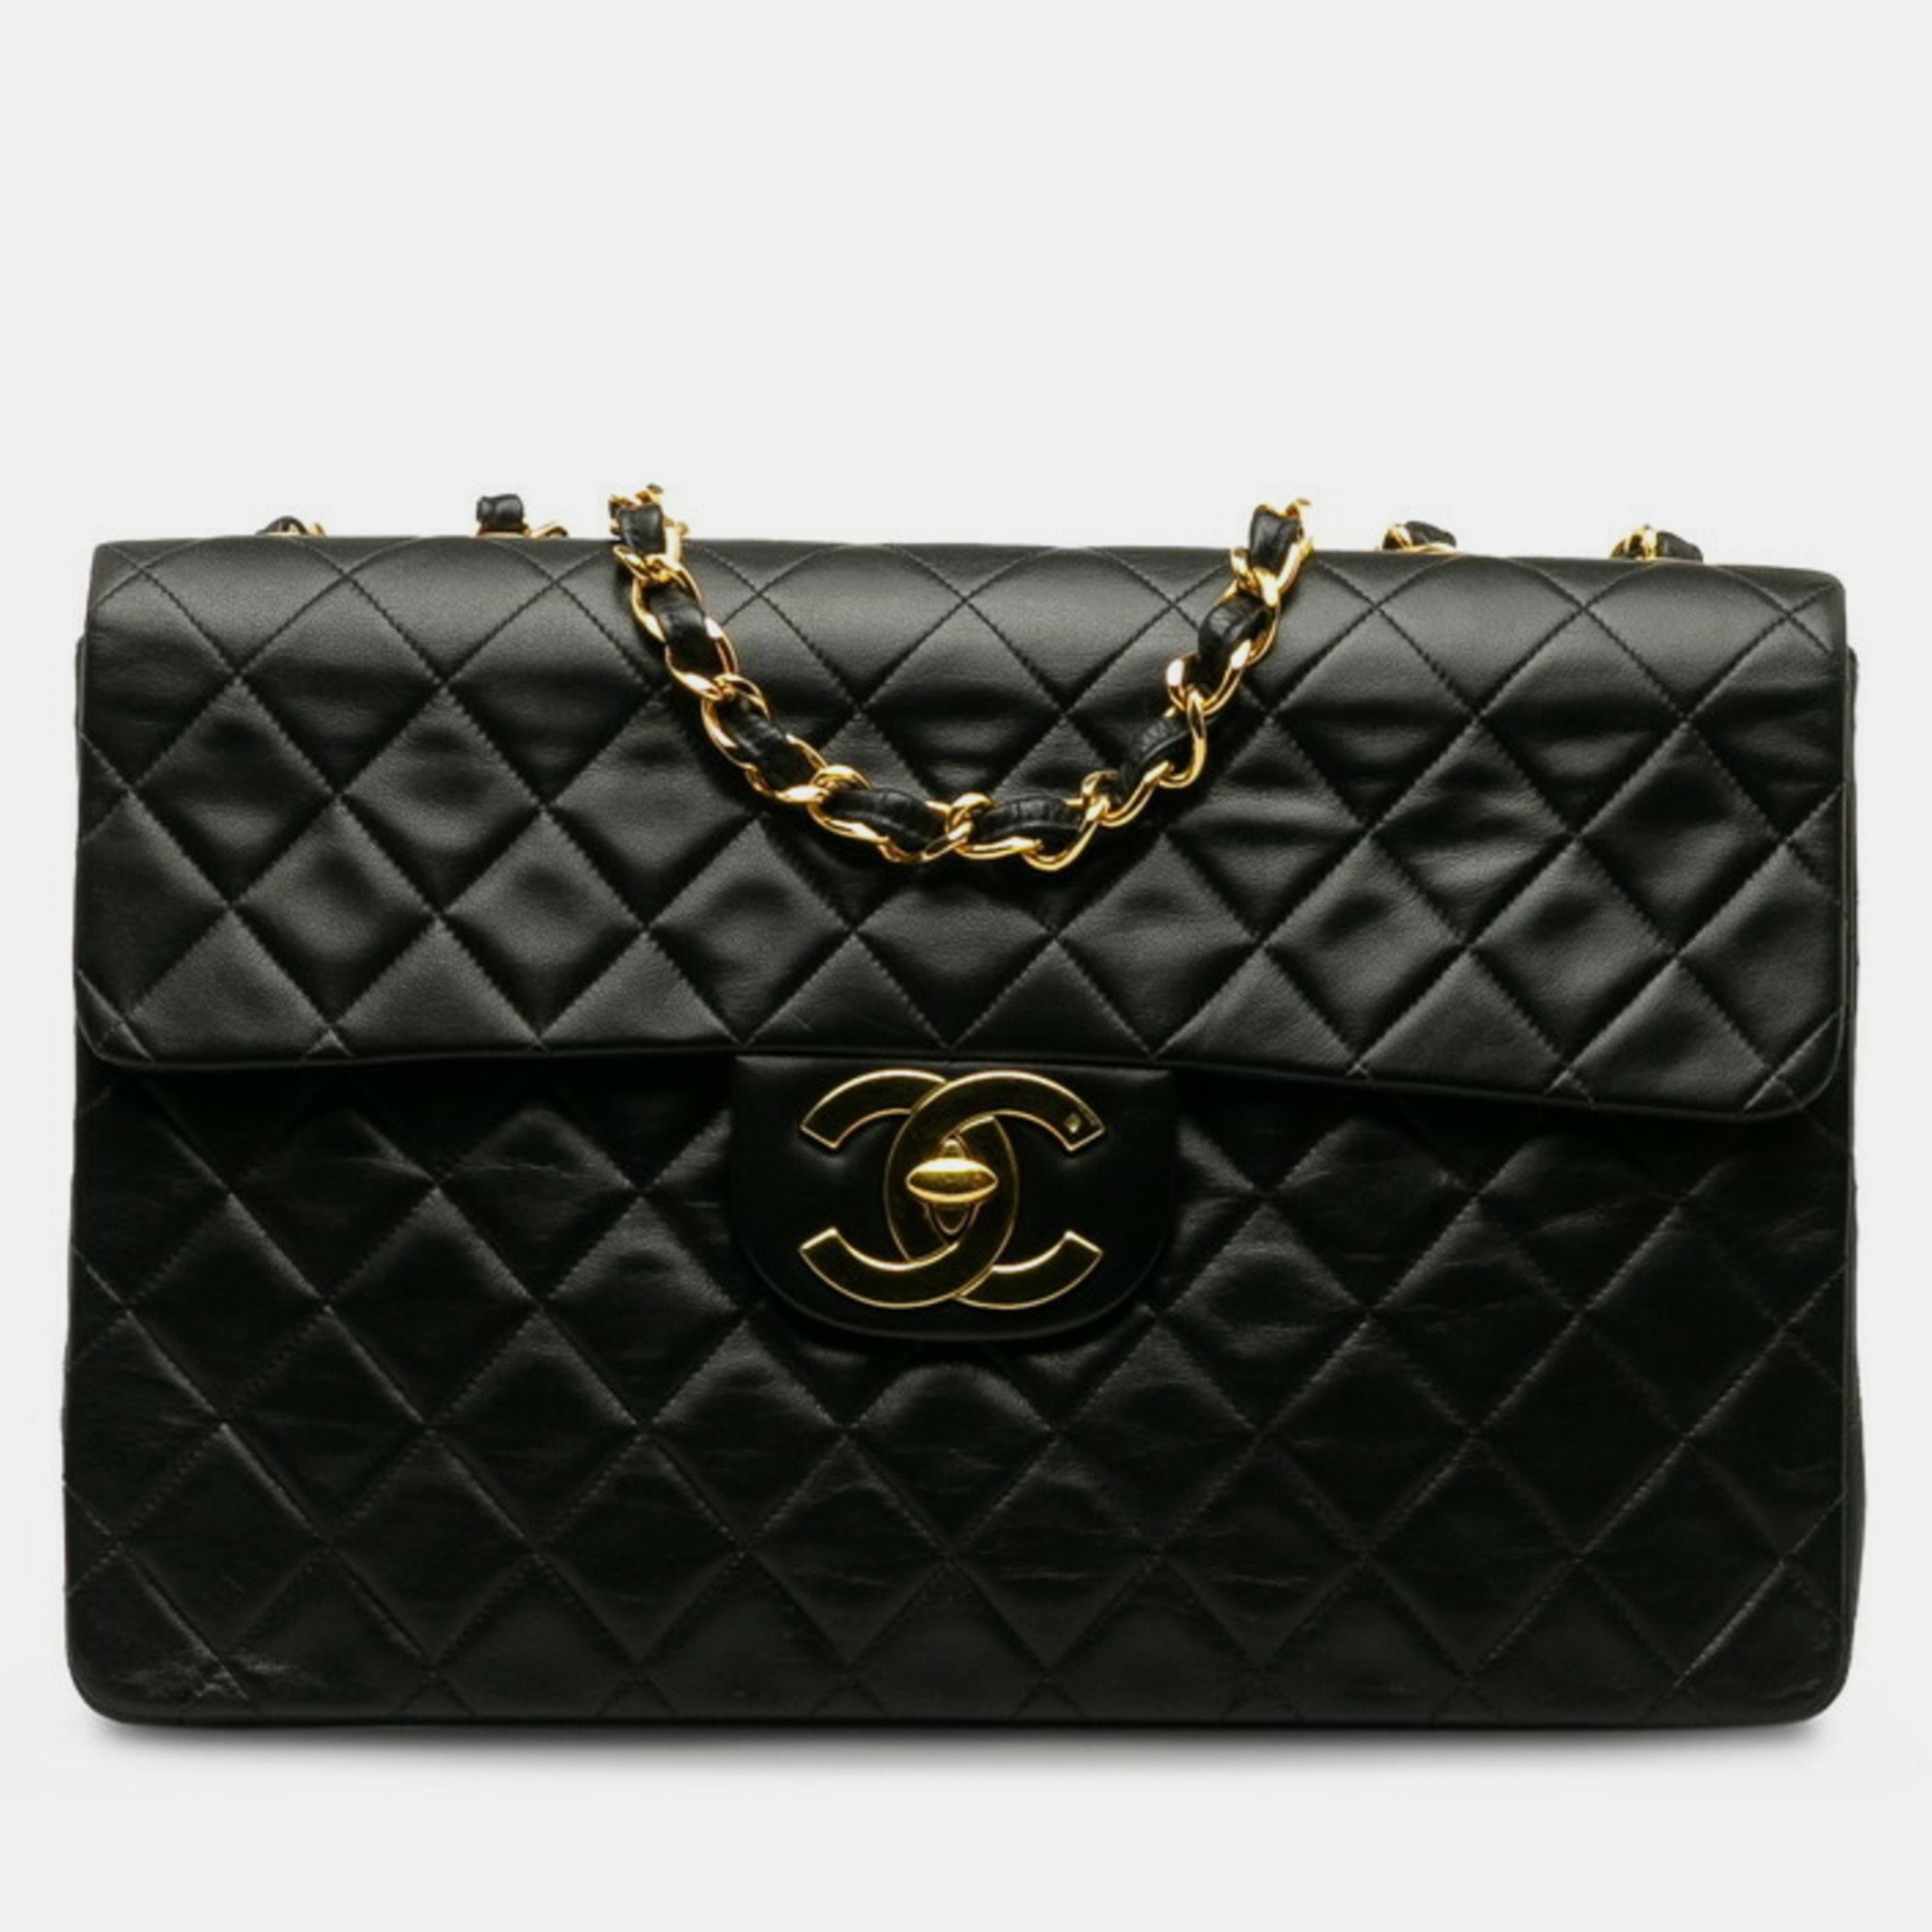 Chanel black quilted classic jumbo xl maxi flap bag